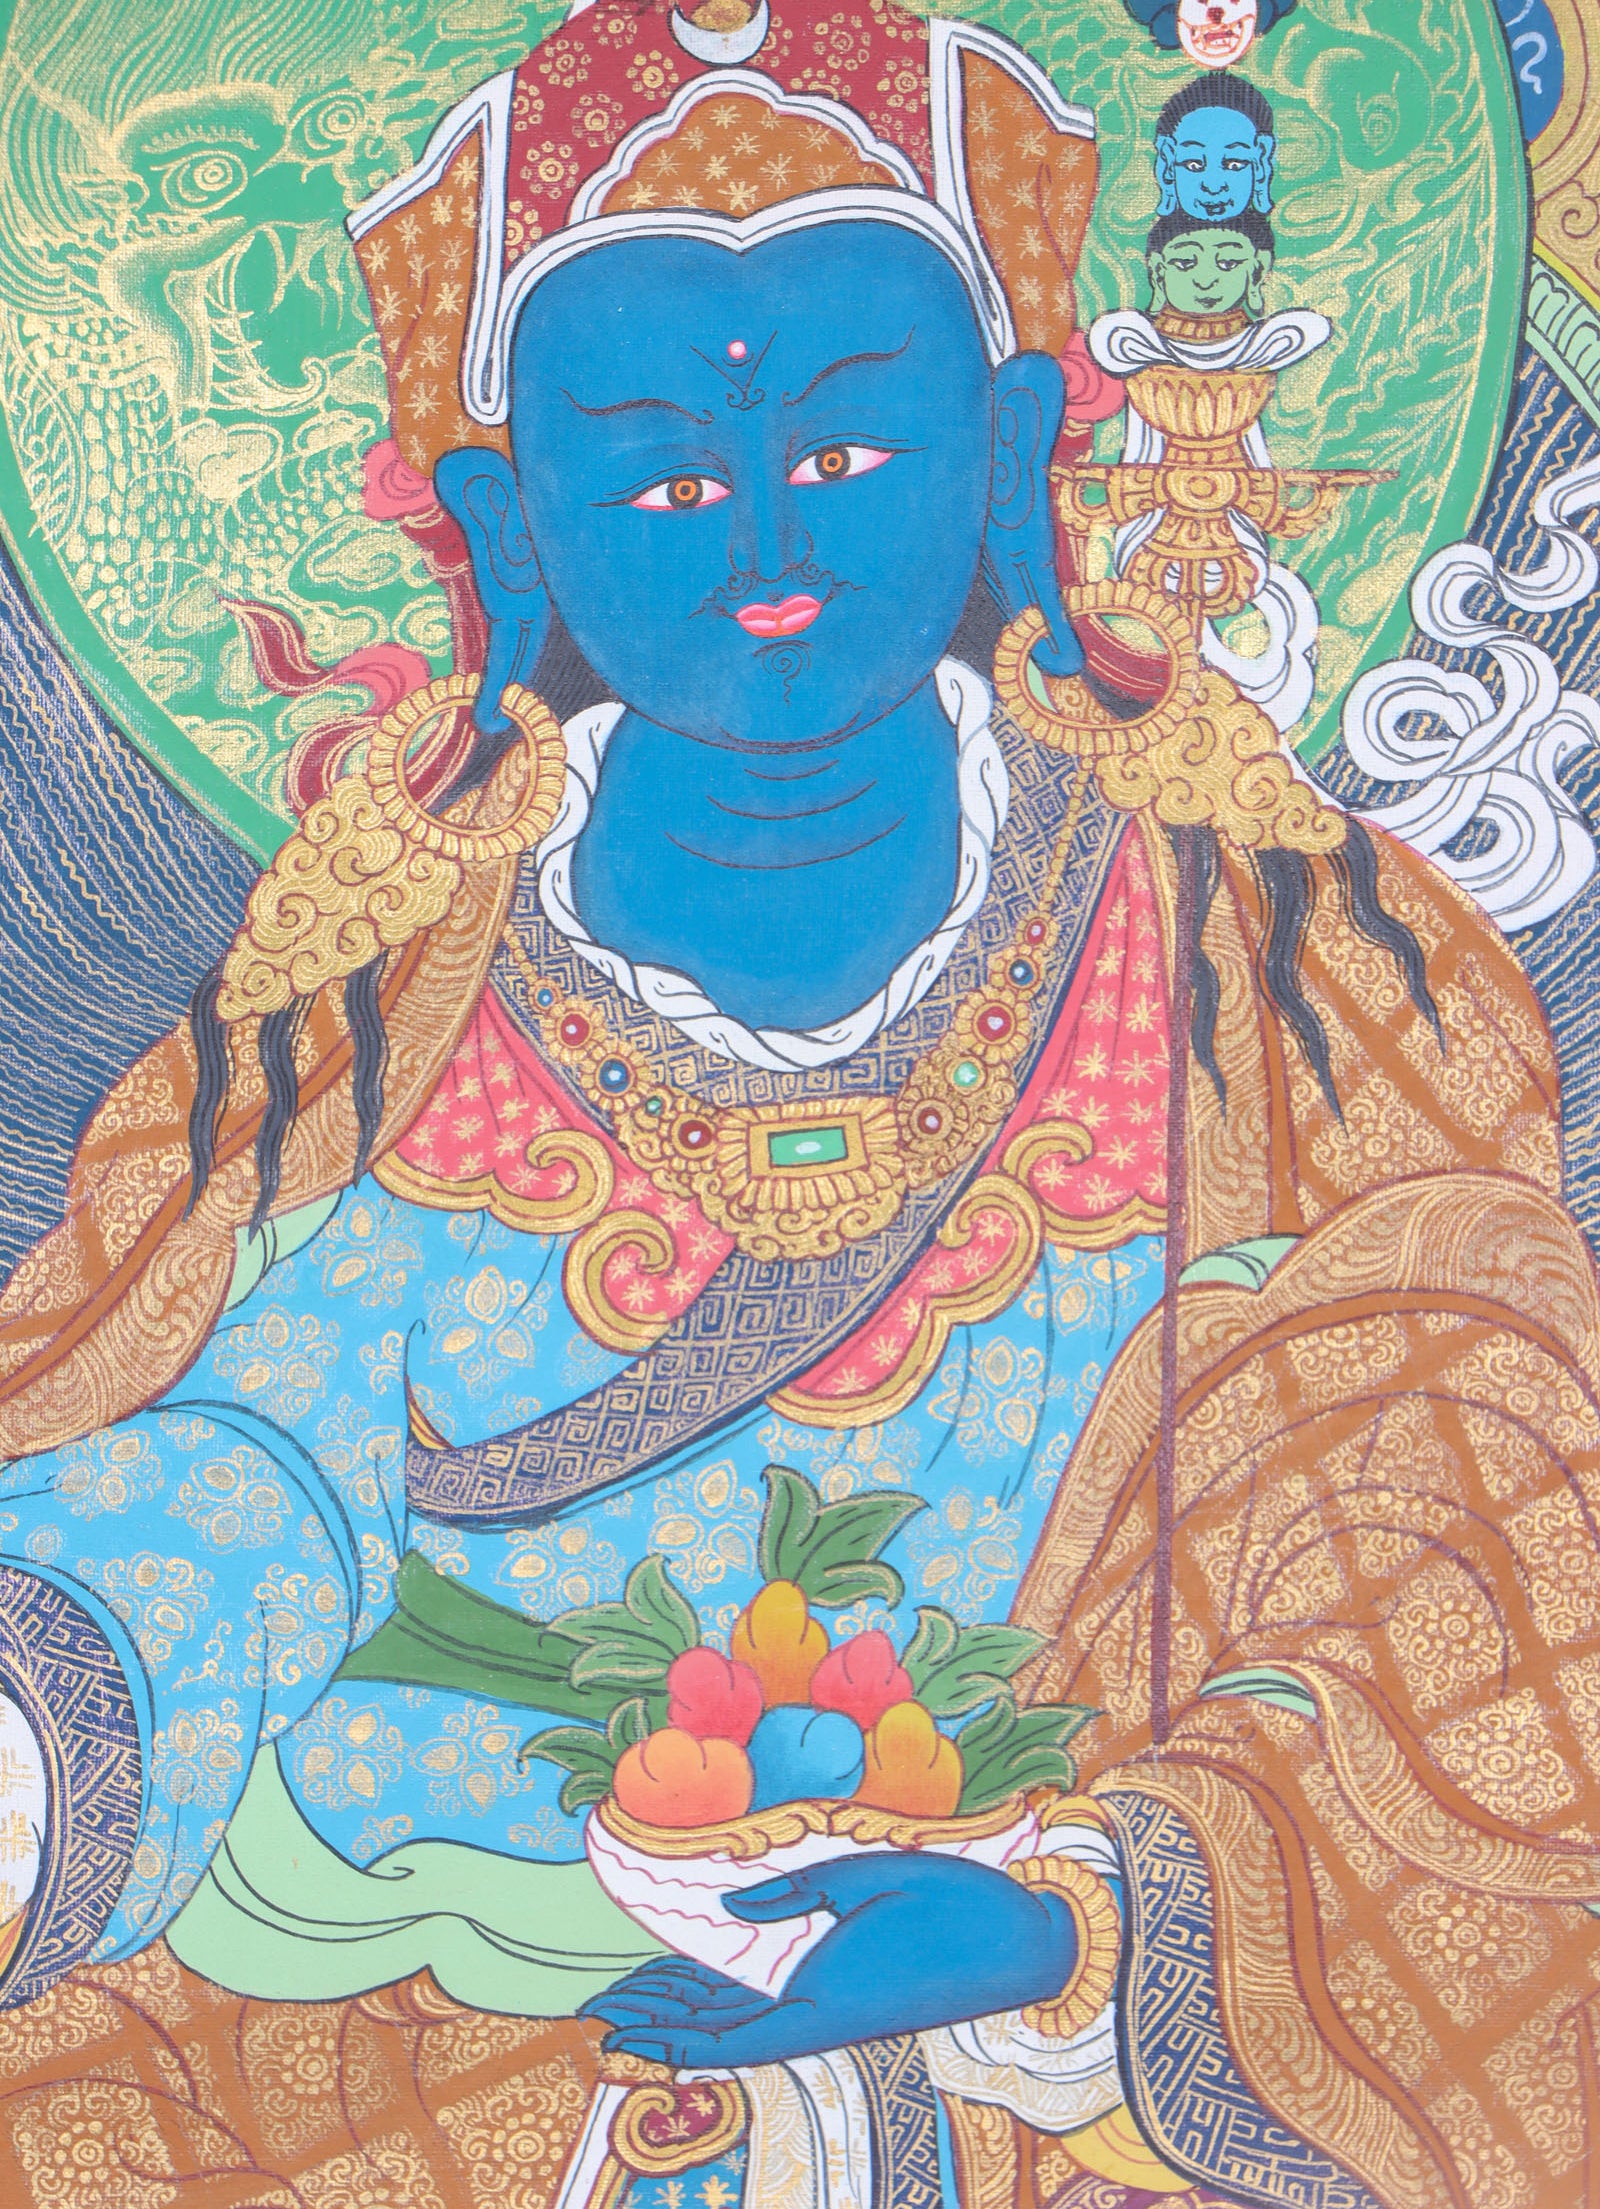 Medicine Guru Thangka Painting for physical and mental wellbeing.